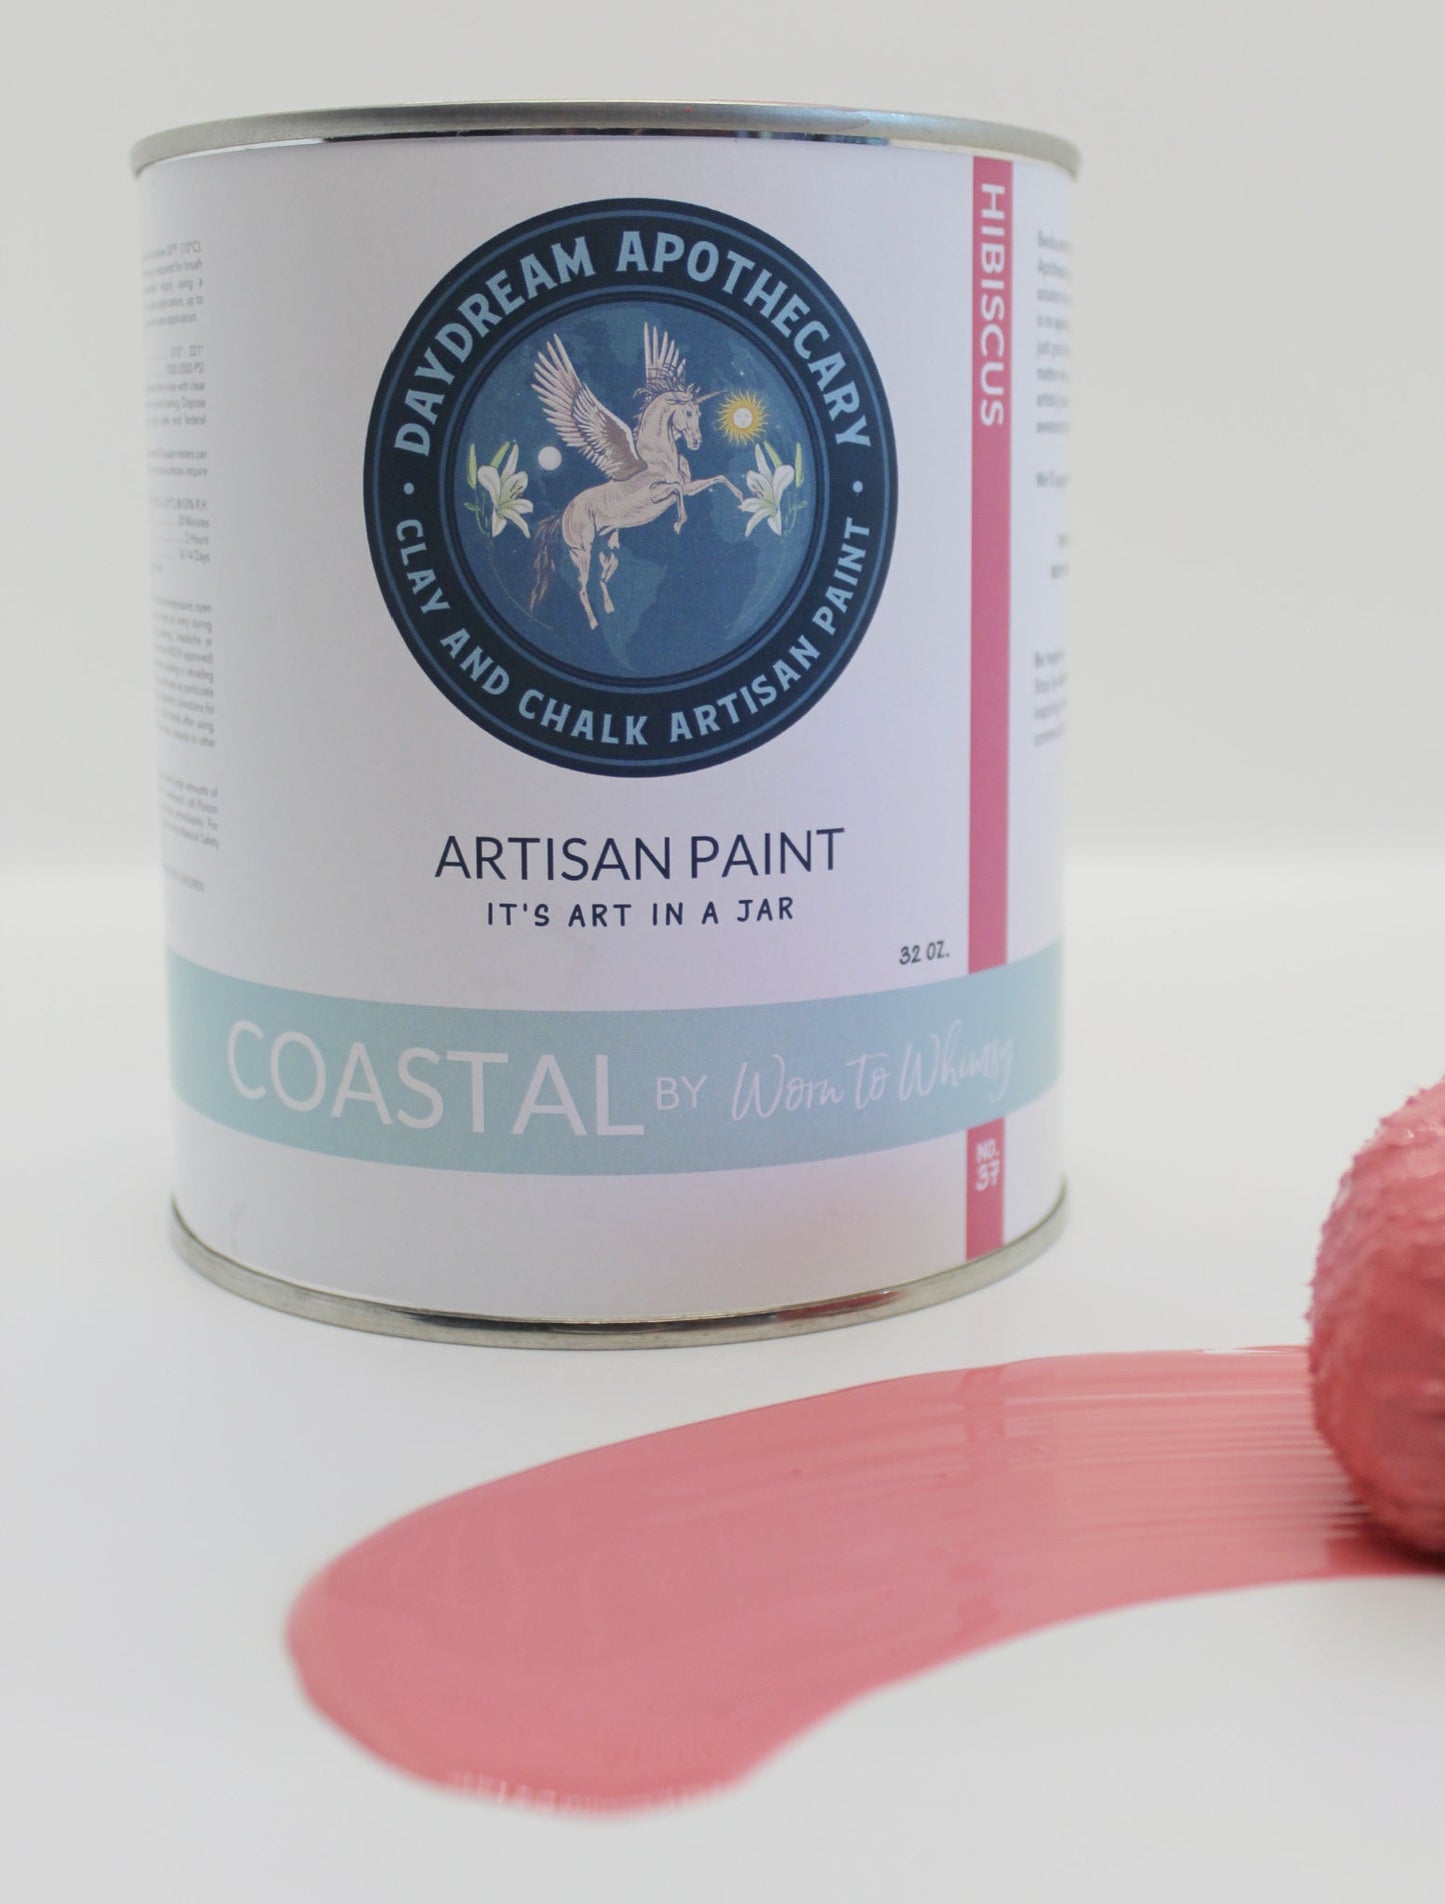 CLOSEOUT SALE! Hibiscus 🌊 COASTAL by Worn to Whimsy | Daydream Apothecary Clay and Chalk Artisan Paint